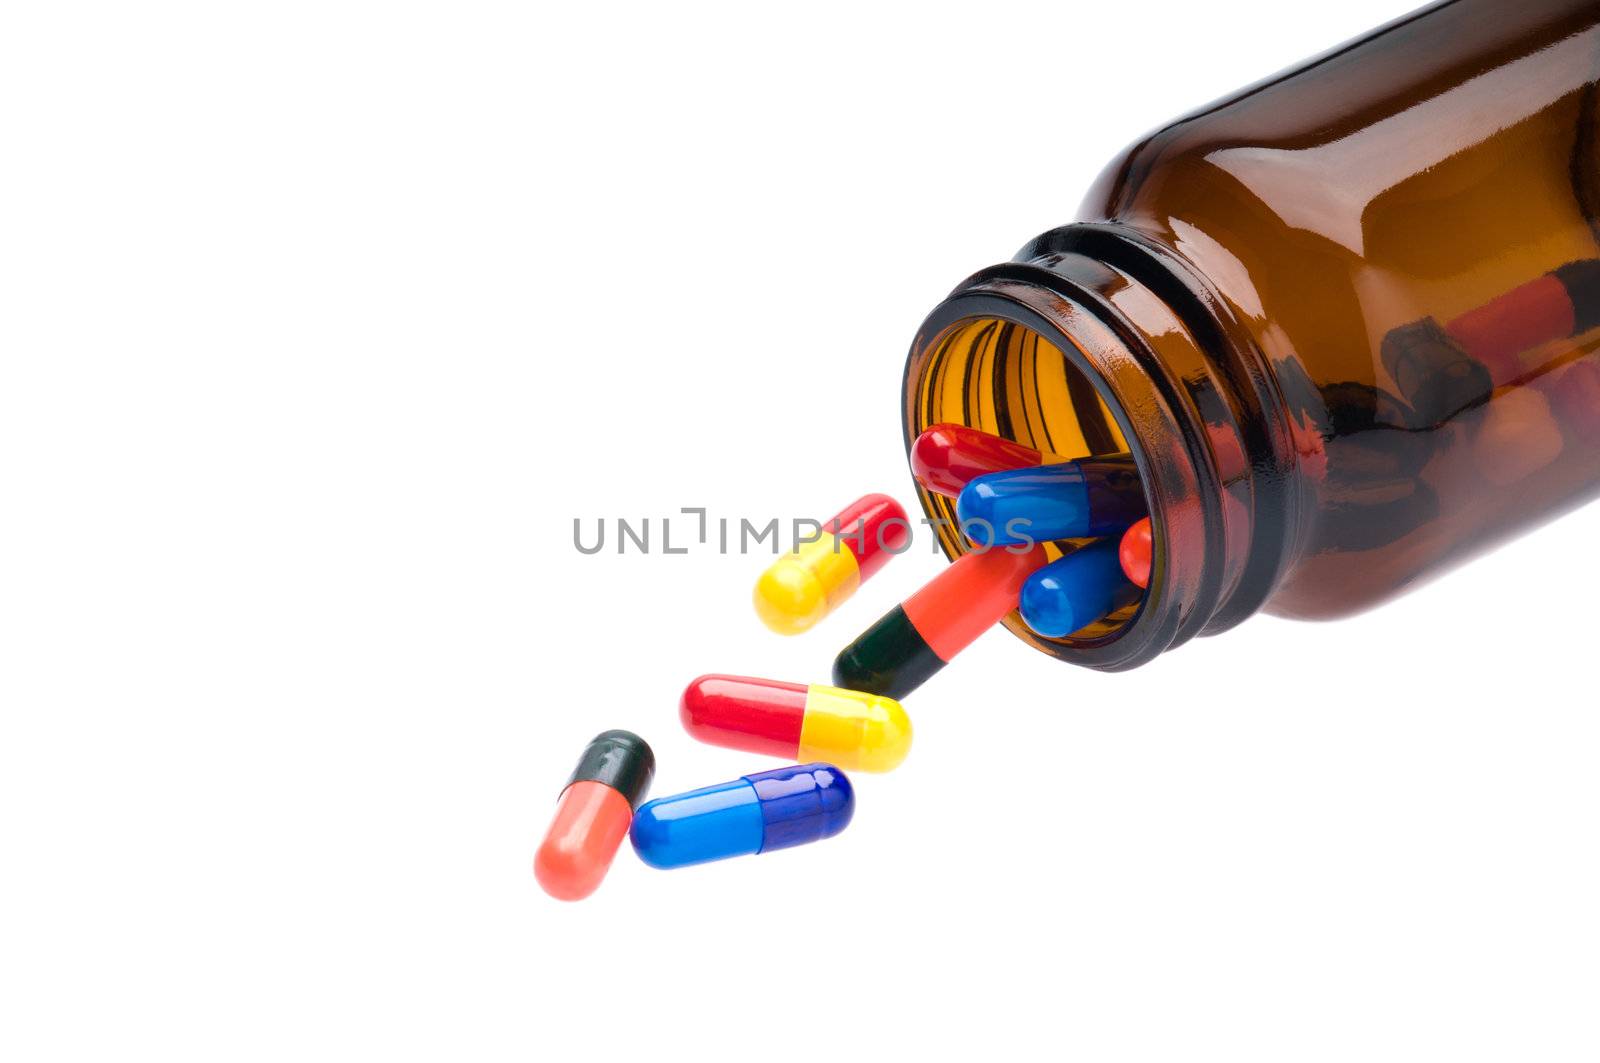 Open pharmaceutical bottle which spills colored capsules by 3523Studio